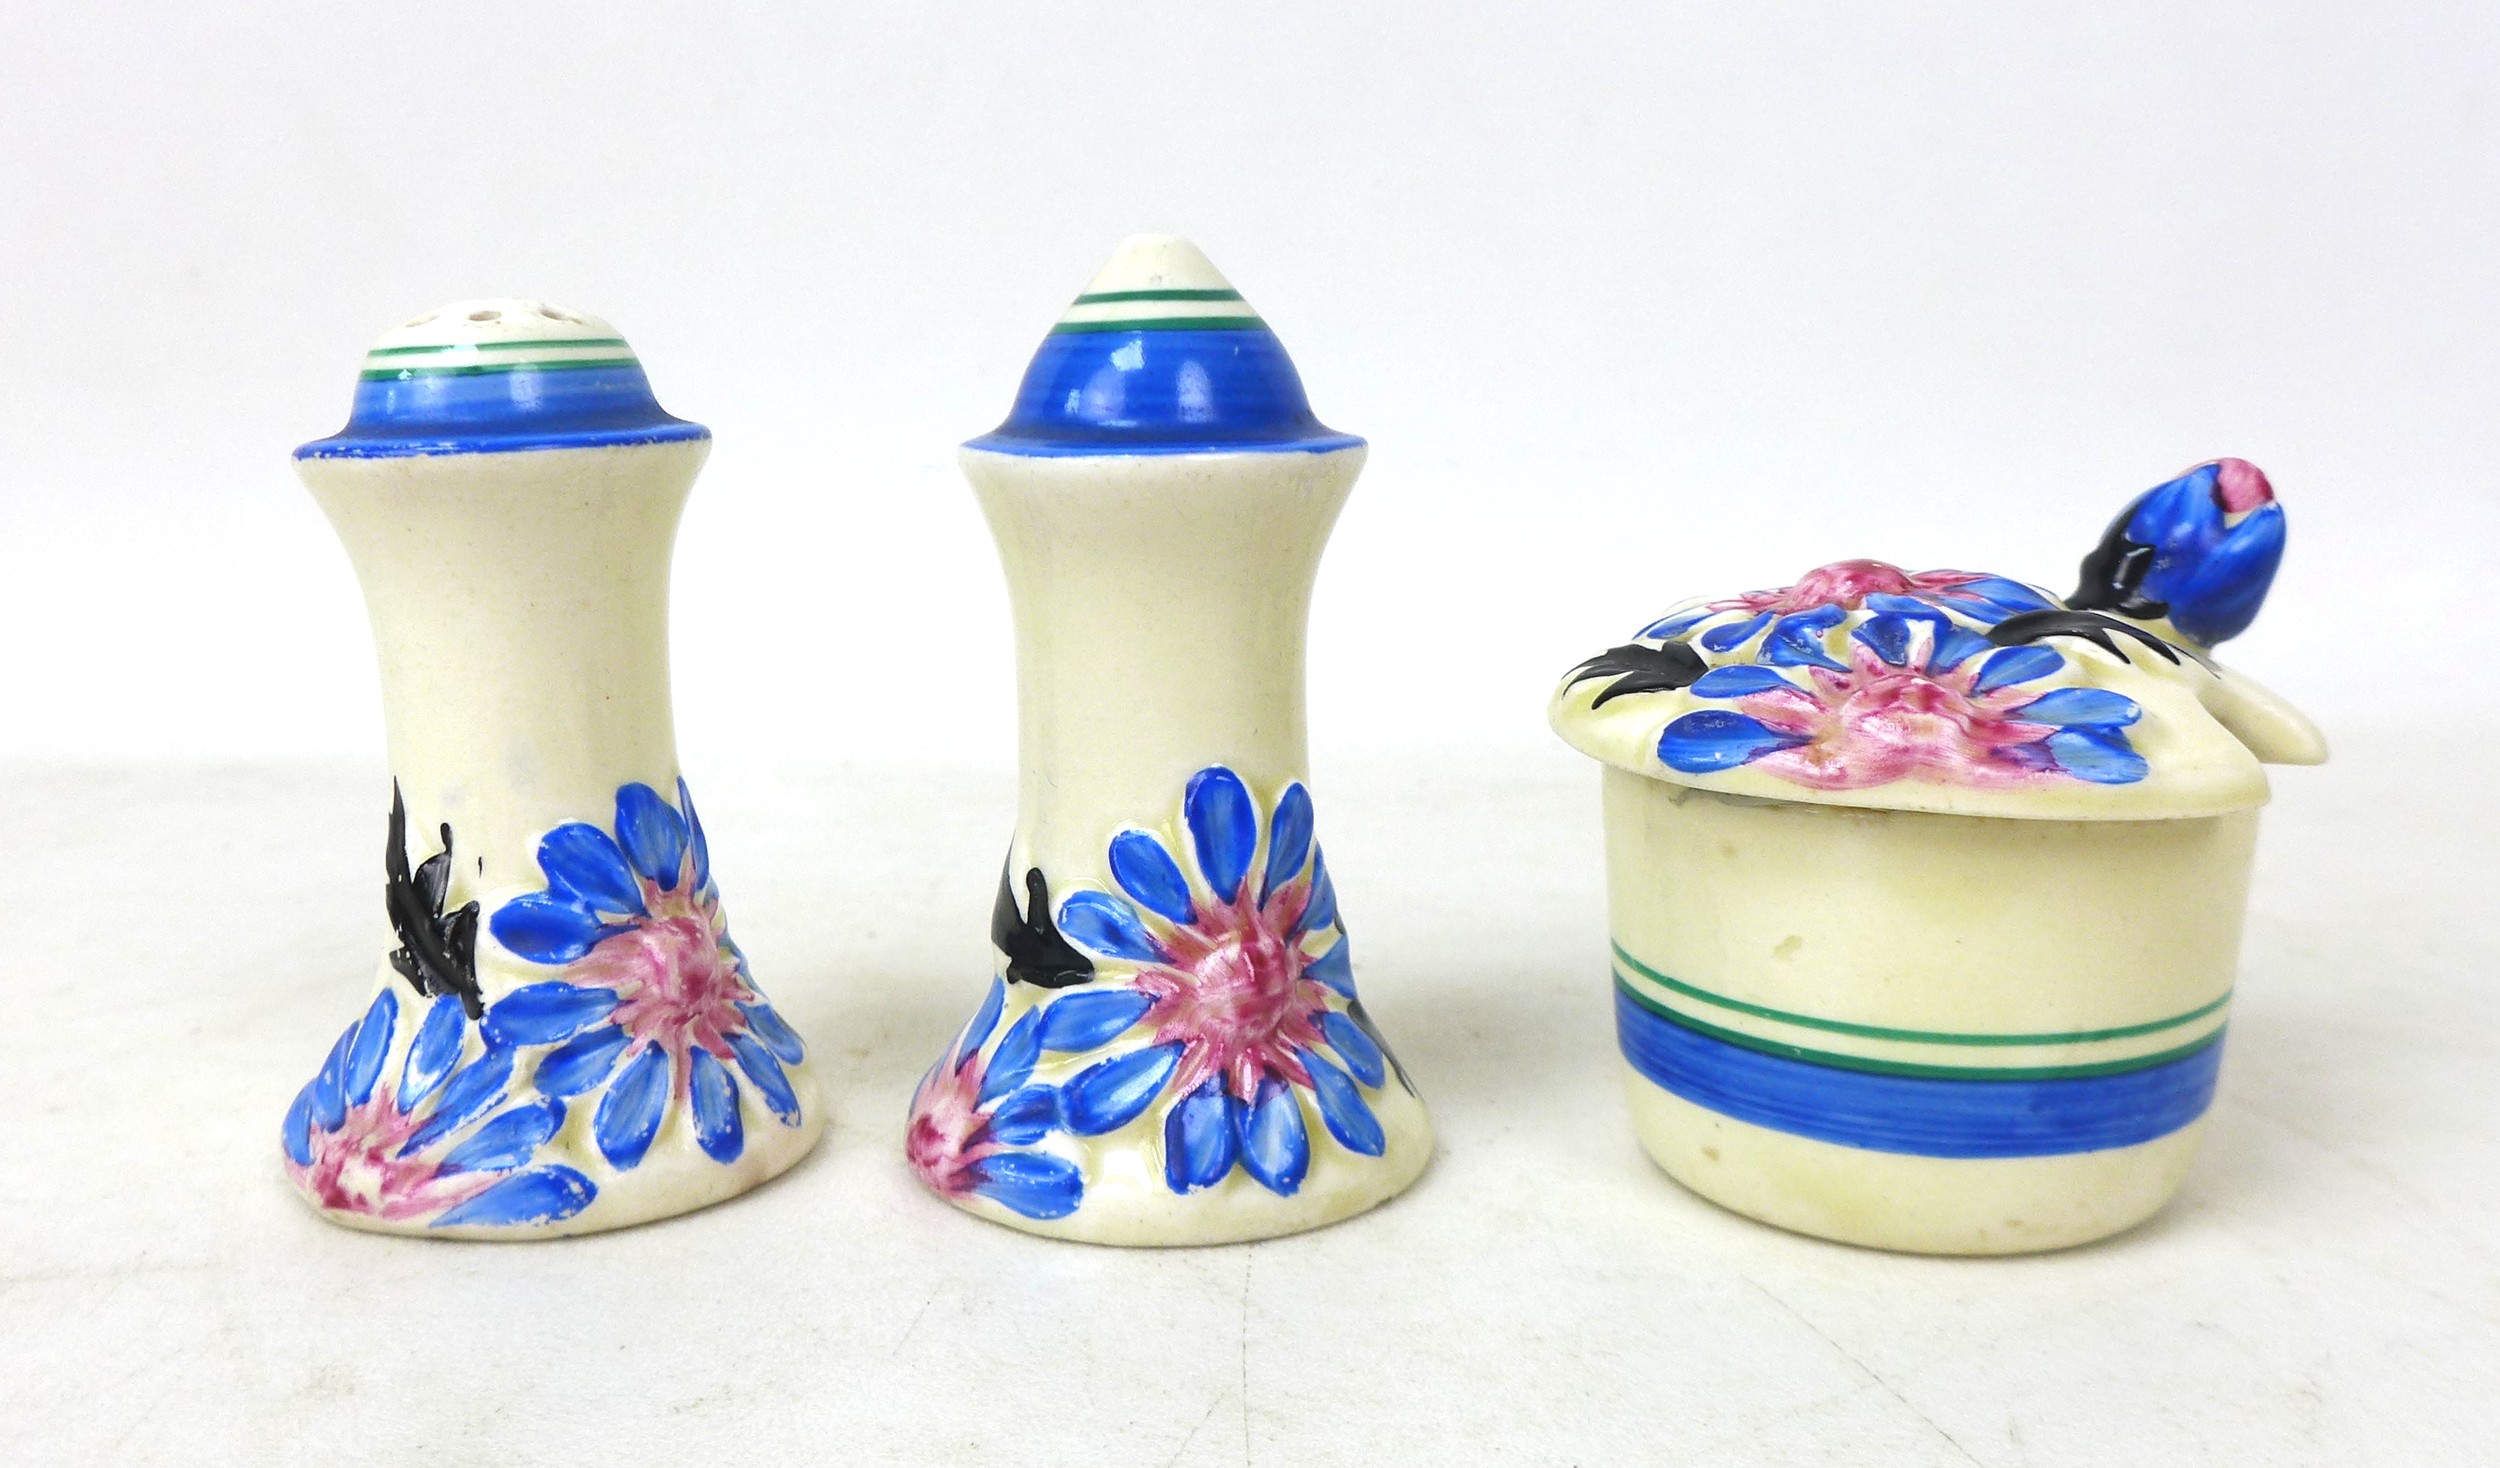 A Clarice Cliff 'Marguerite' Muffineer cruet set, relief moulded with flowers and foliage picked out